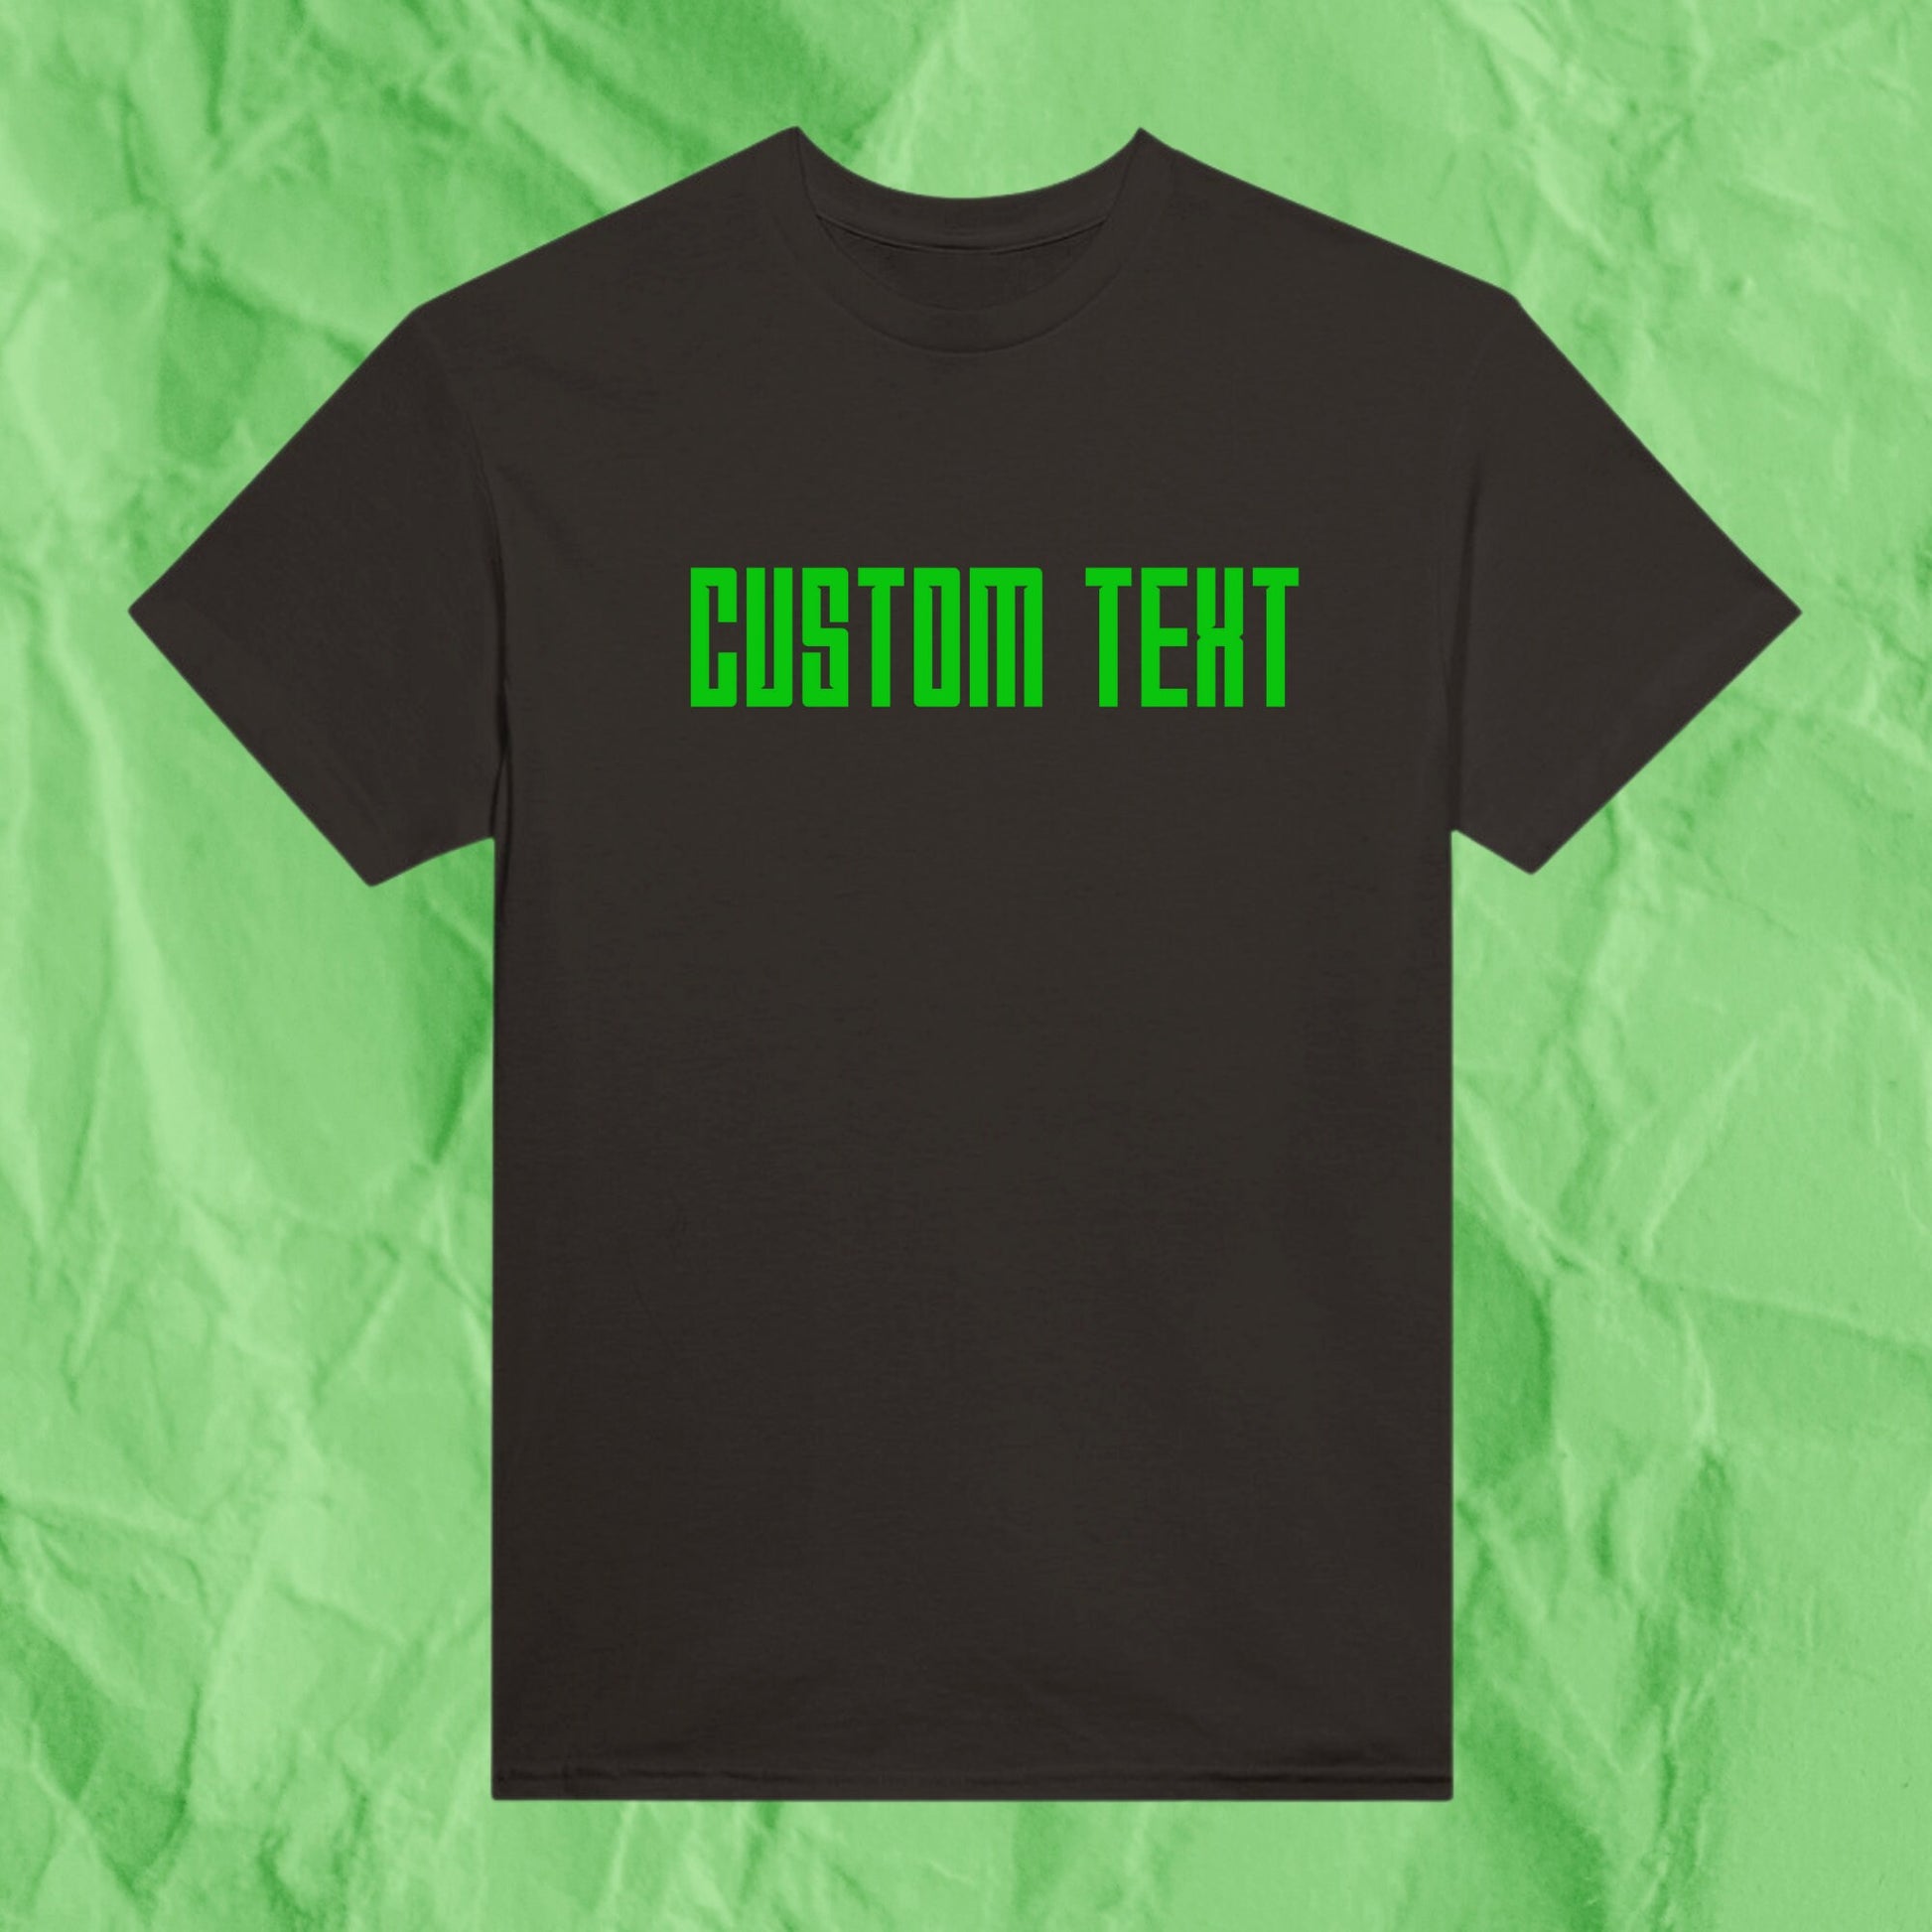 Your Custom Text T-Shirt, Customize Your Own Shirt, Matching Create Your Own Shirts, 20 Font Option Custom Printing Retro y2k Vintage Tee